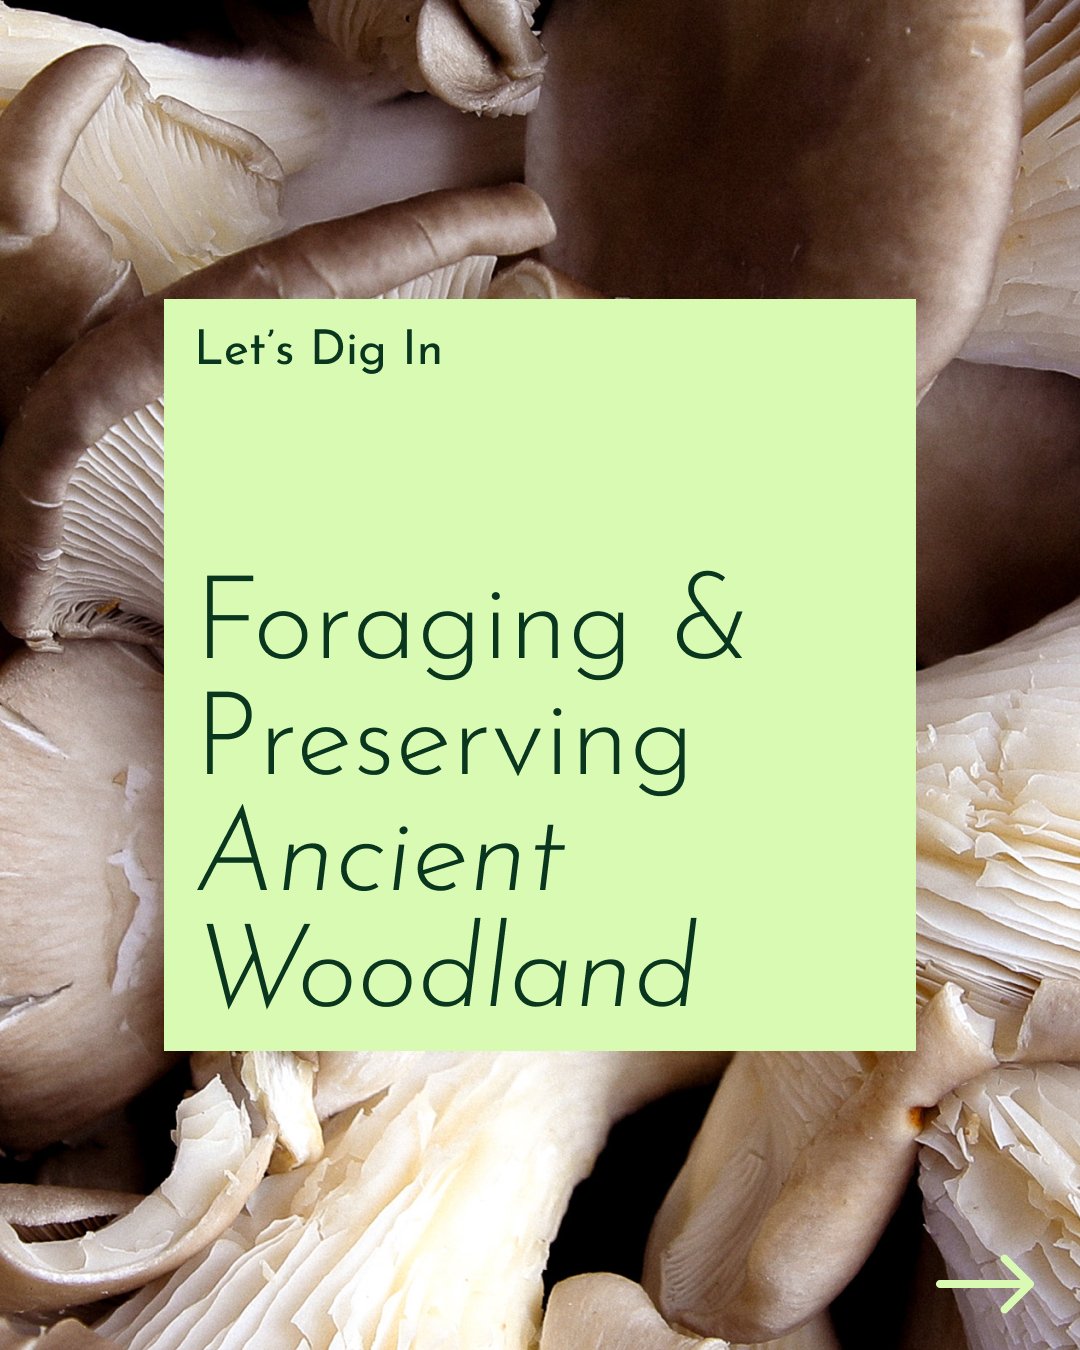 Let's Dig In, a dive into foraging and preserving Ancient Woodland. Share so others can learn too!

#shoplocal #freshproduce #food #fresh #supportsmallbusiness #farmtotable #local #buylocal #eatfresh #farm #farming #foodstagram #shoplocal #instagram 